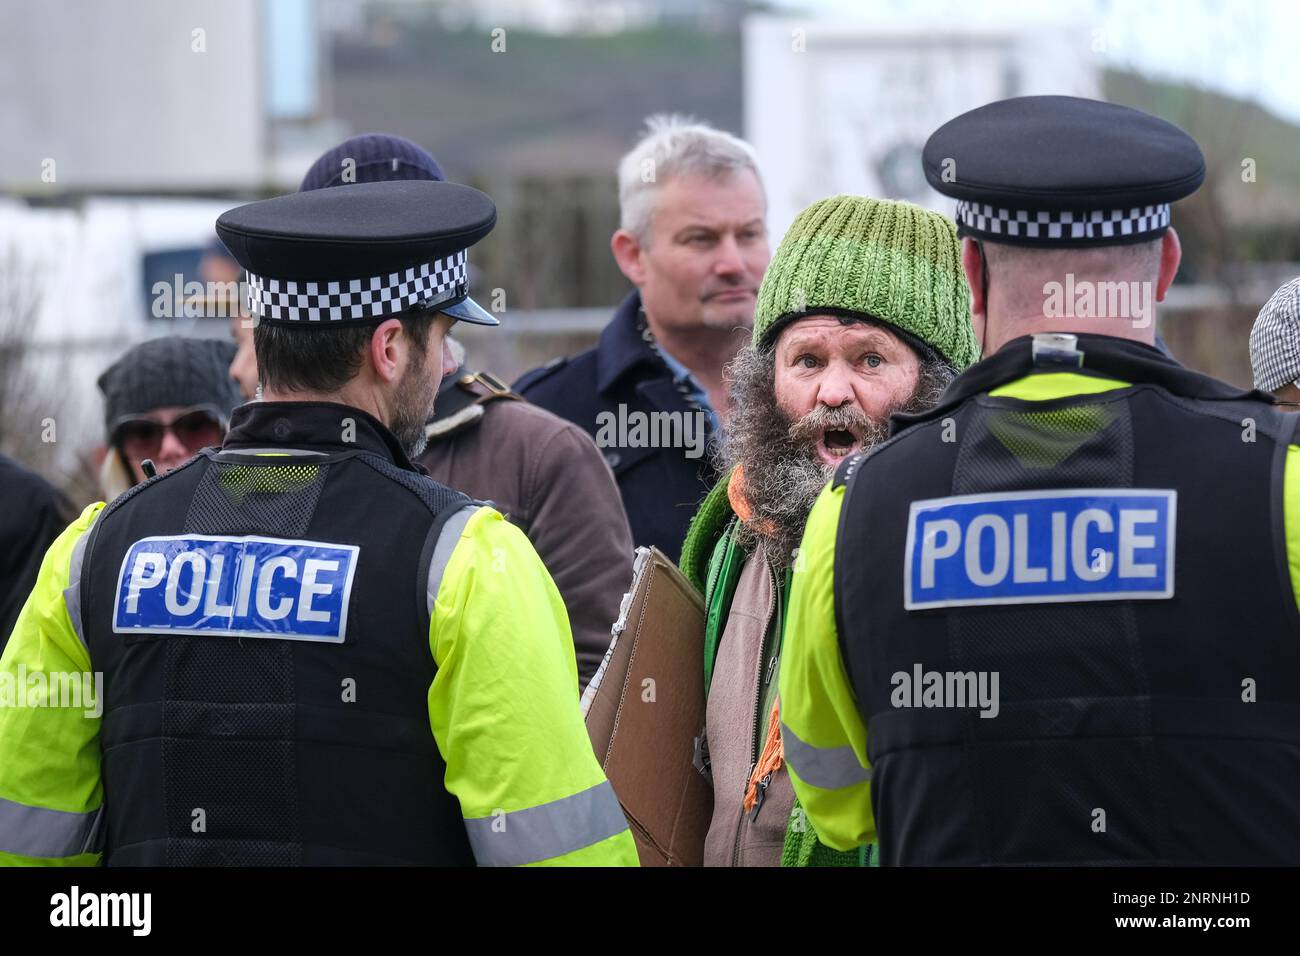 Police officers confrontingt an angry protester shouting during a demonstration organised by the right wing group Reform UK against asylum seekers pla Stock Photo